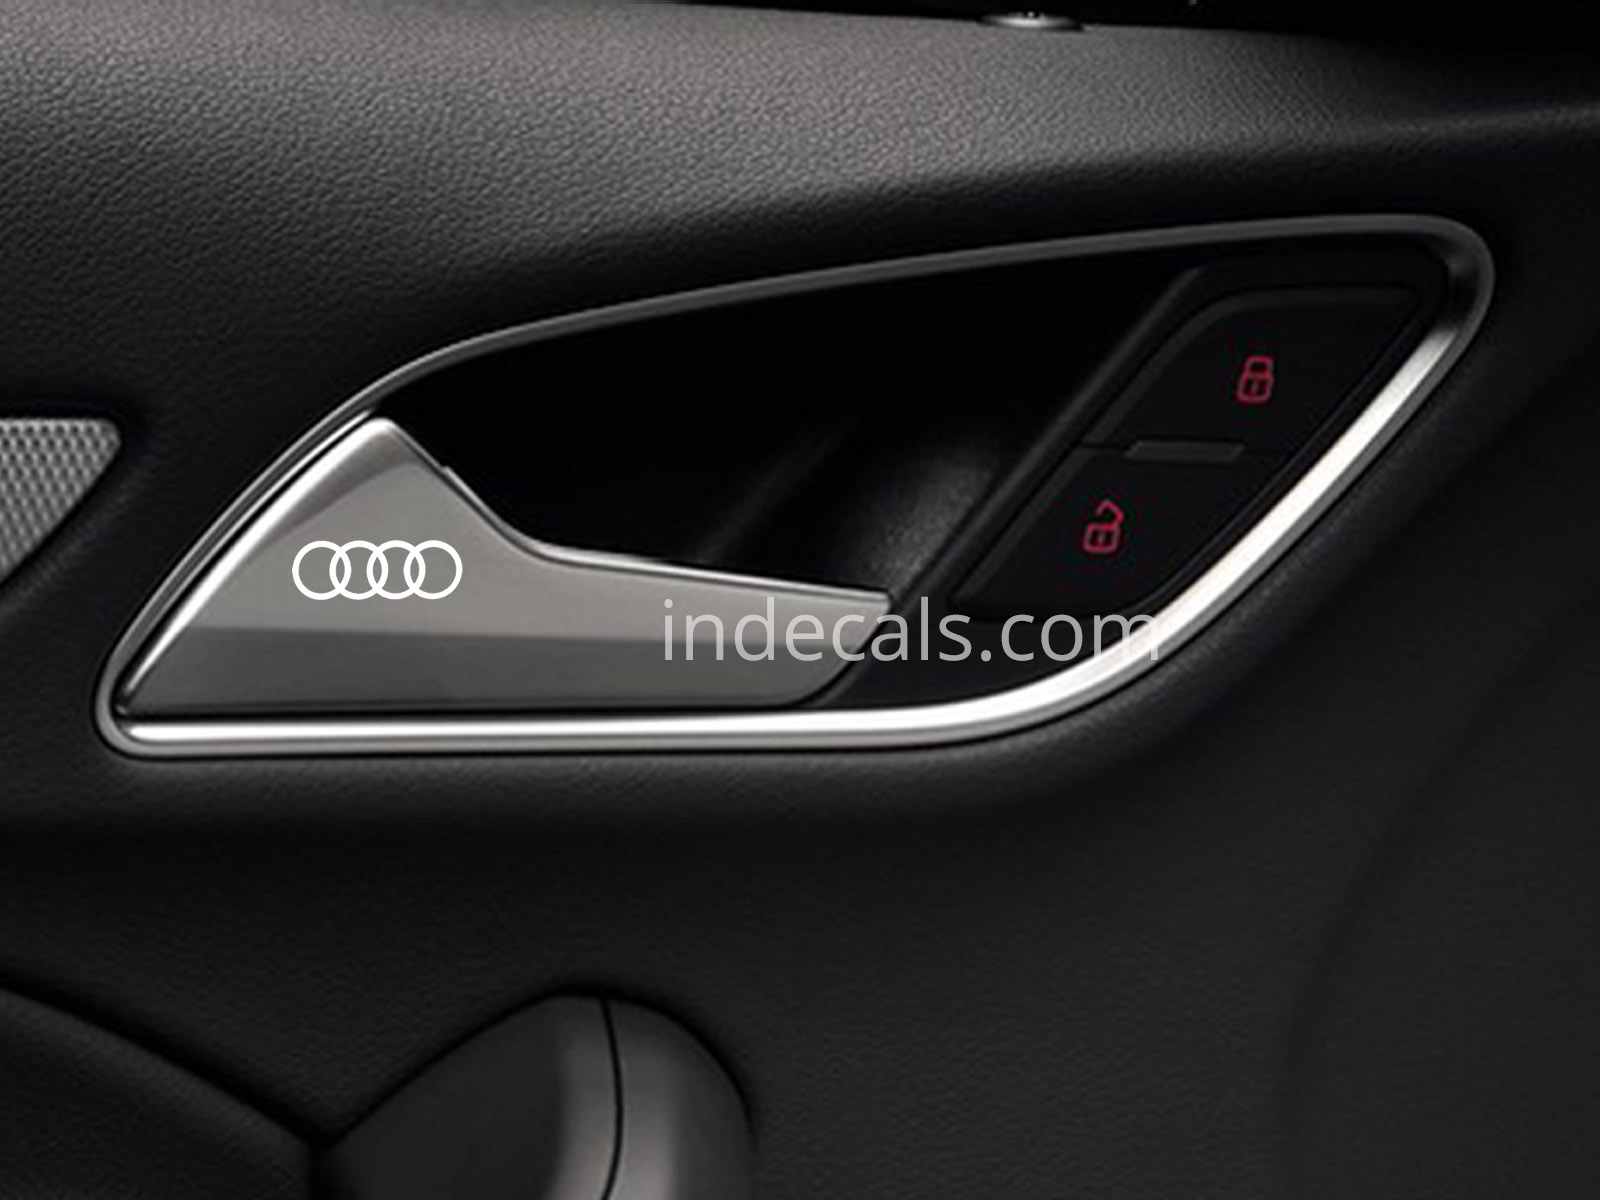 6 x Audi Rings Stickers for Door Handle - White